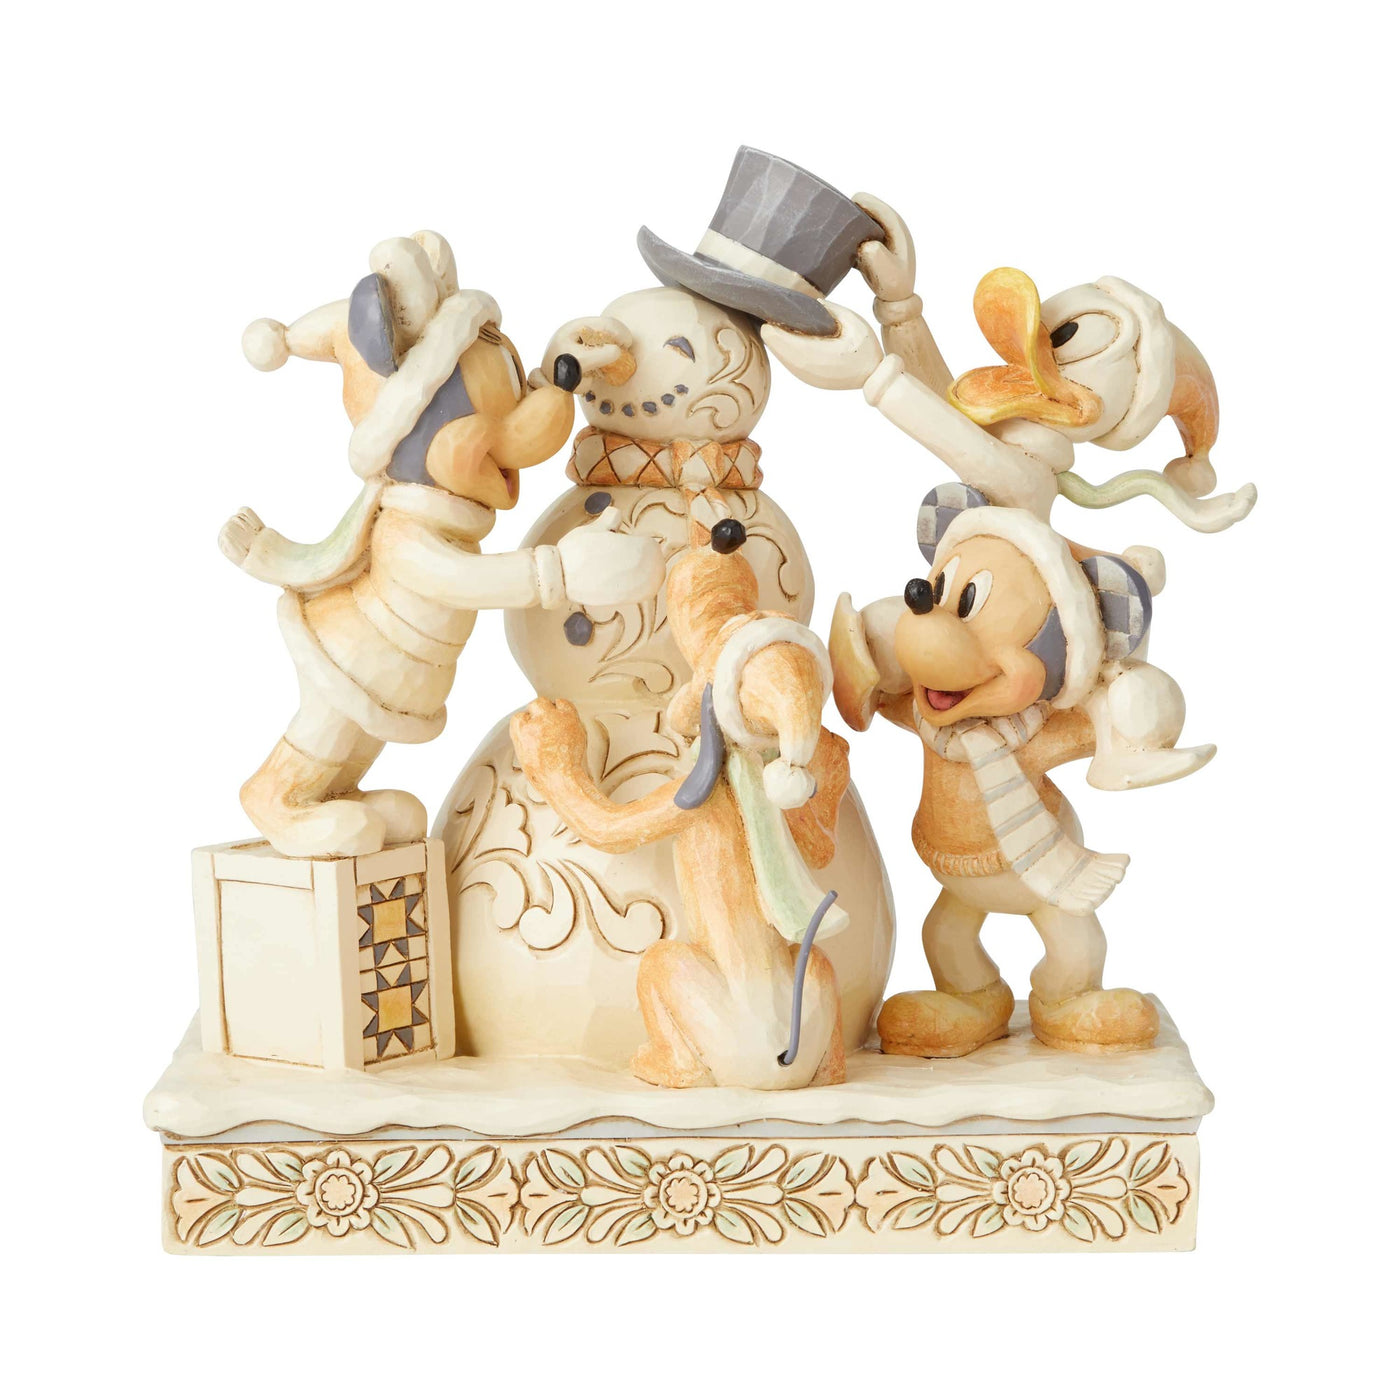 Jim Shore Disney Traditions Mickey Fab Four White Woodland Figurine New with Box